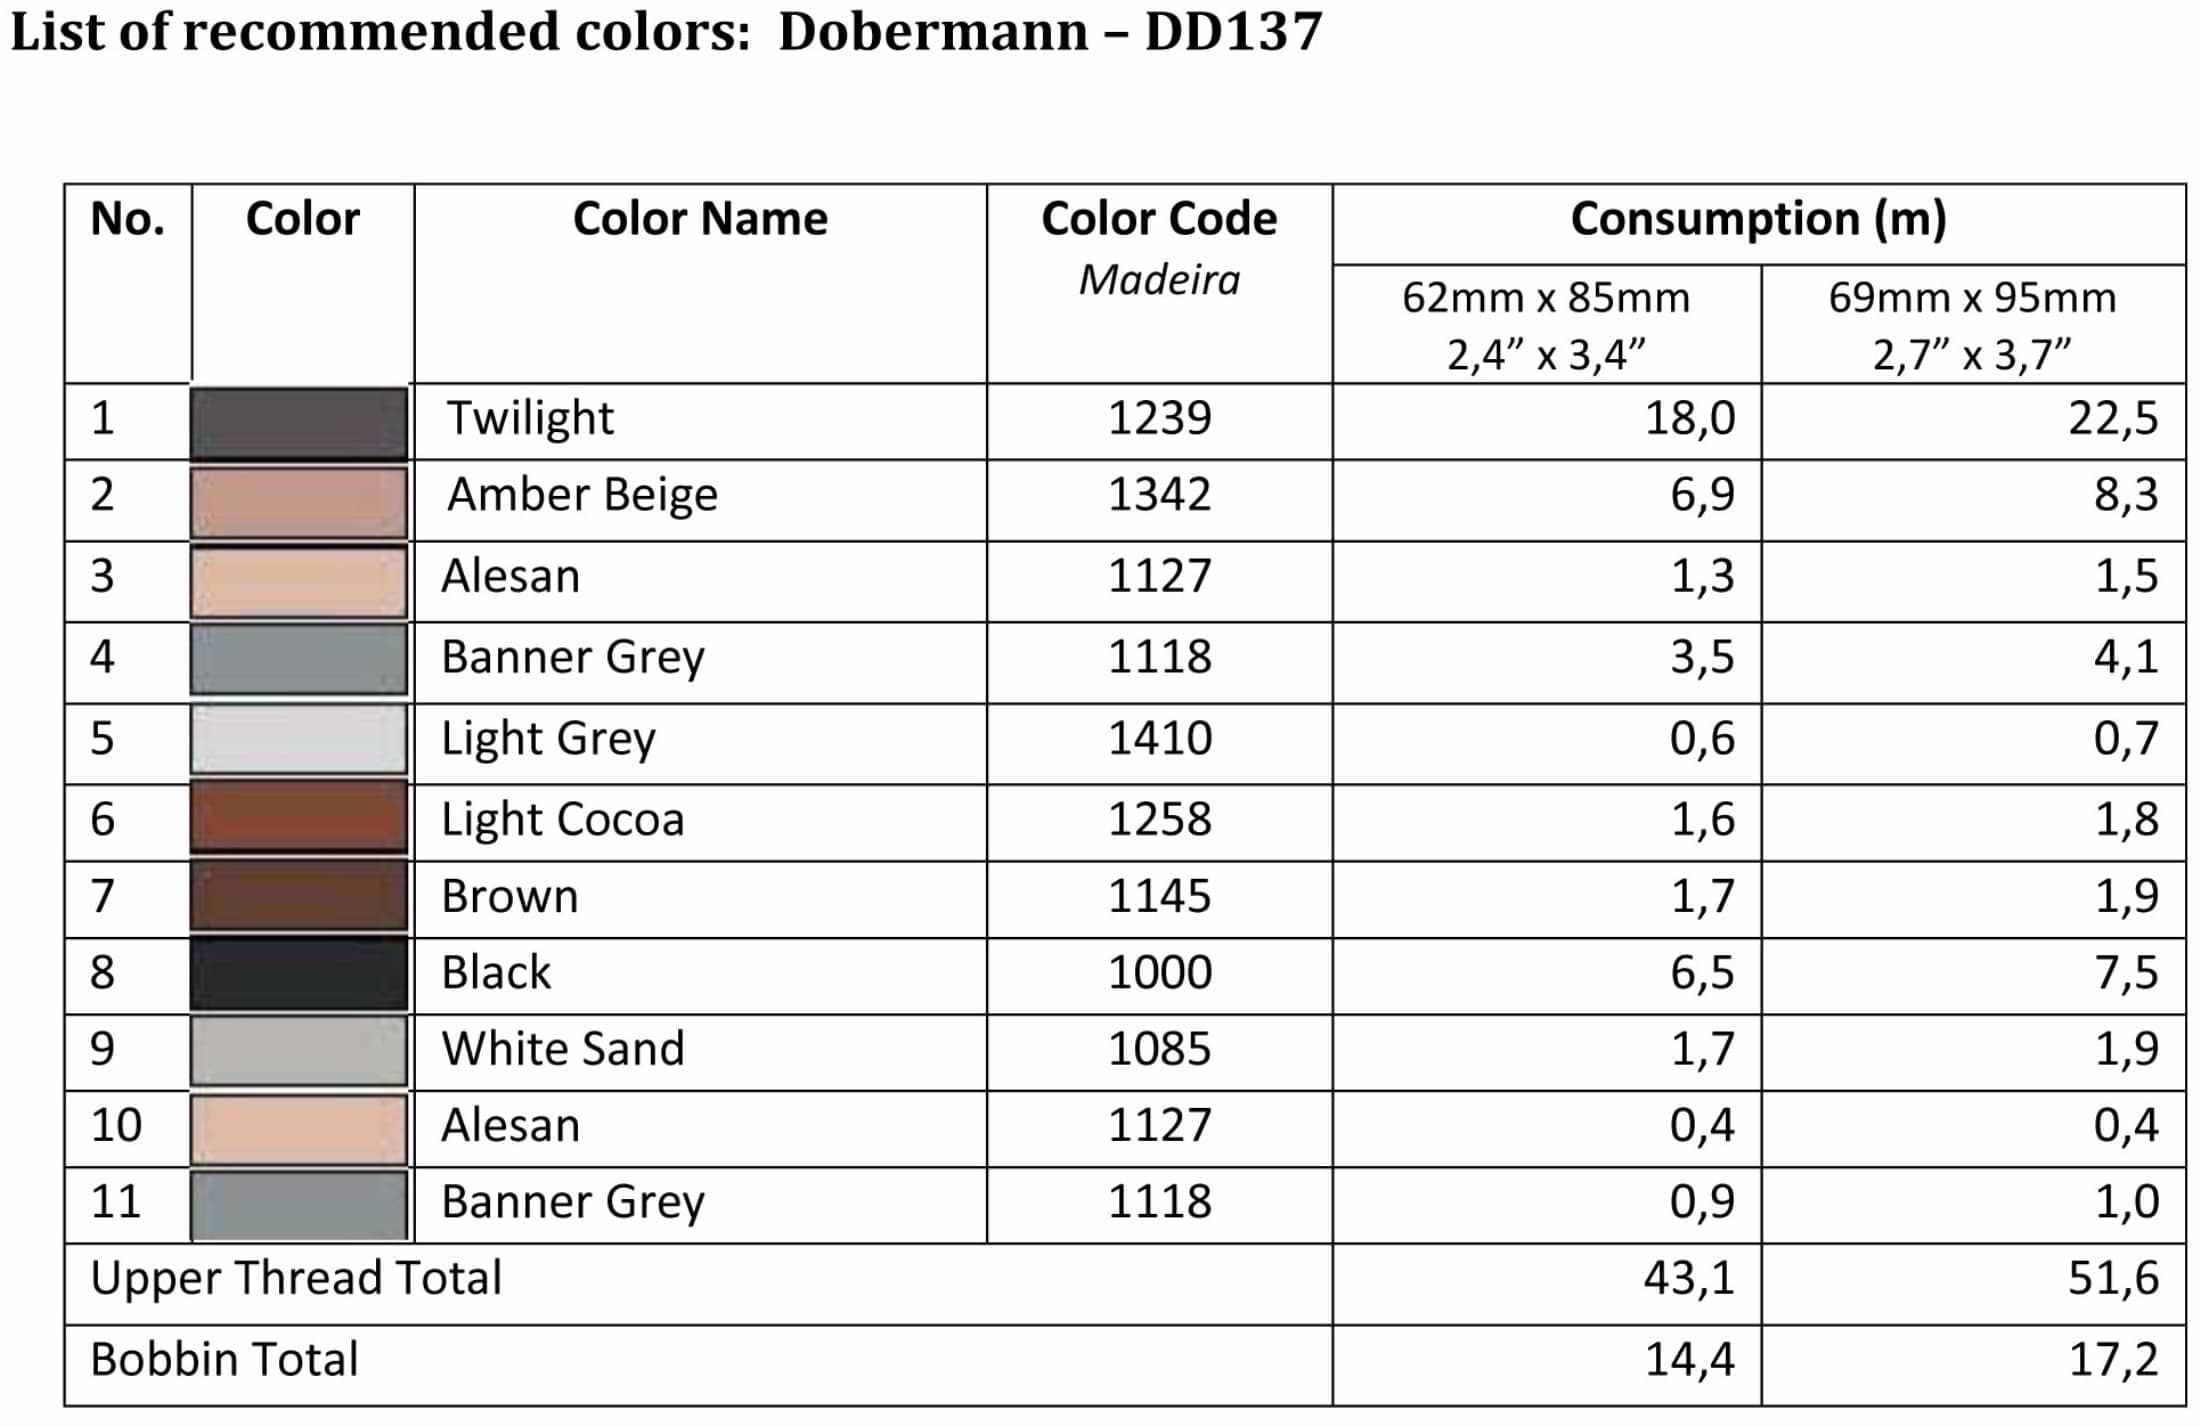 List of recommended colors - DD137